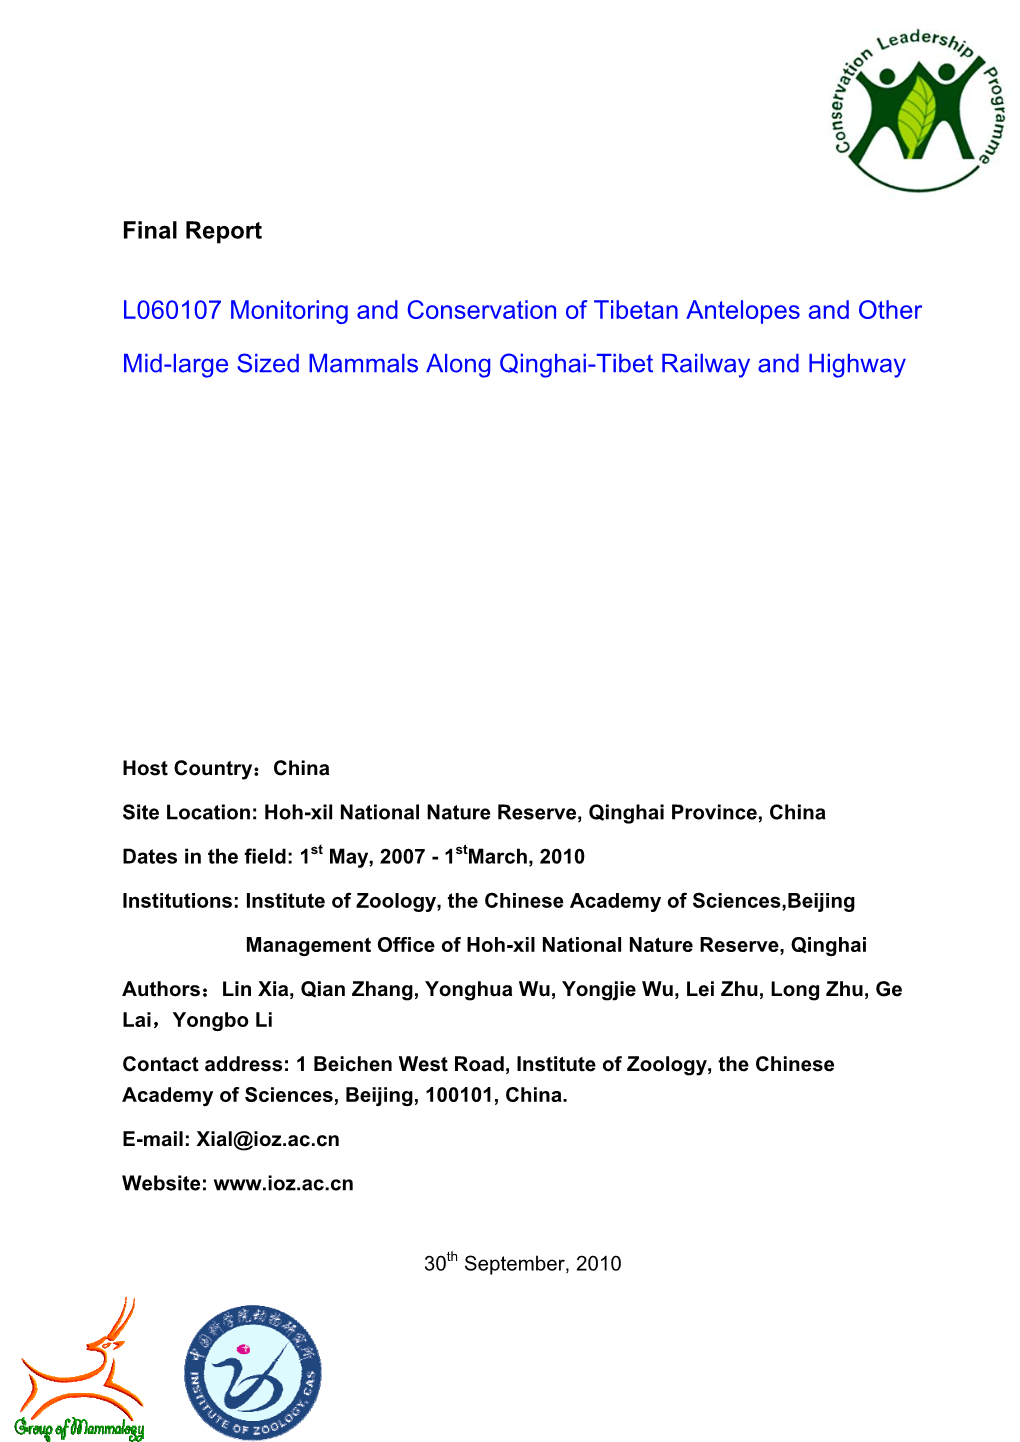 L060107 Monitoring and Conservation of Tibetan Antelopes and Other